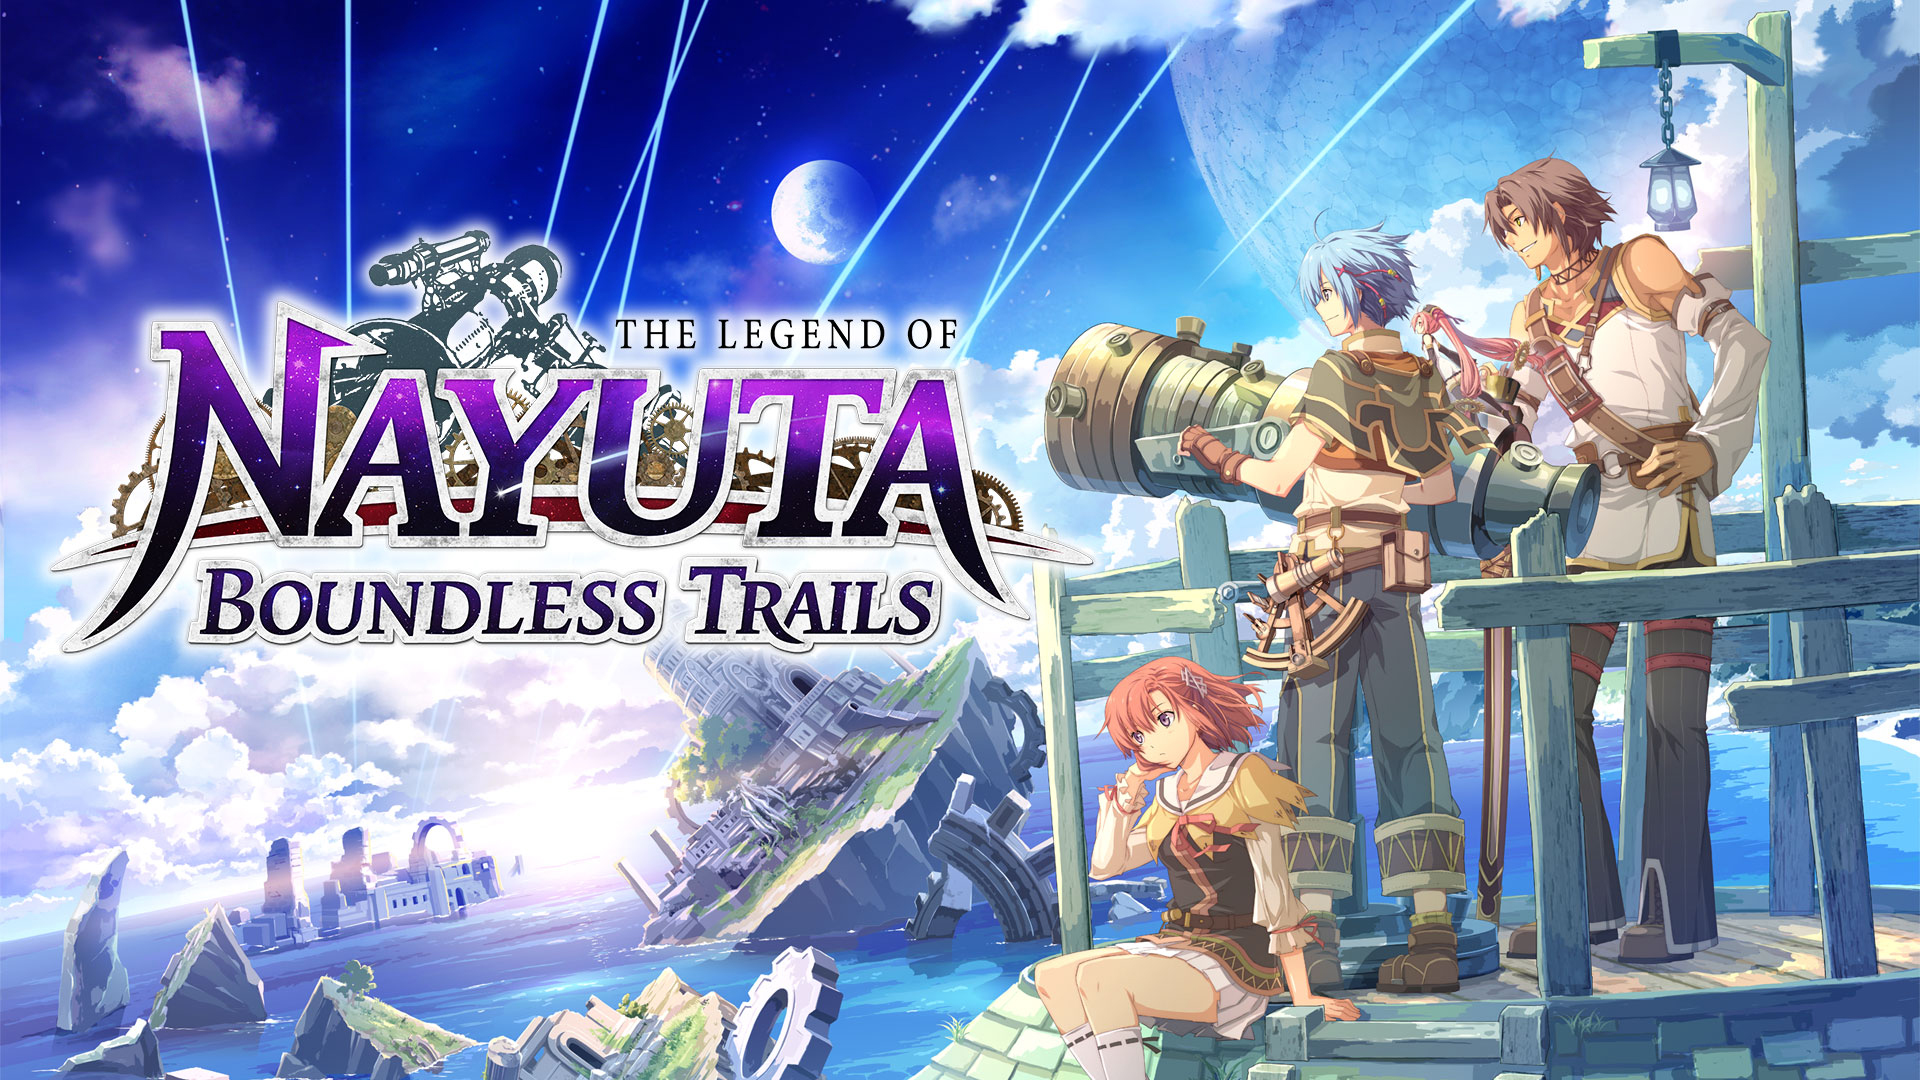 My thoughts on The Legend of Nayuta: Boundless Trails